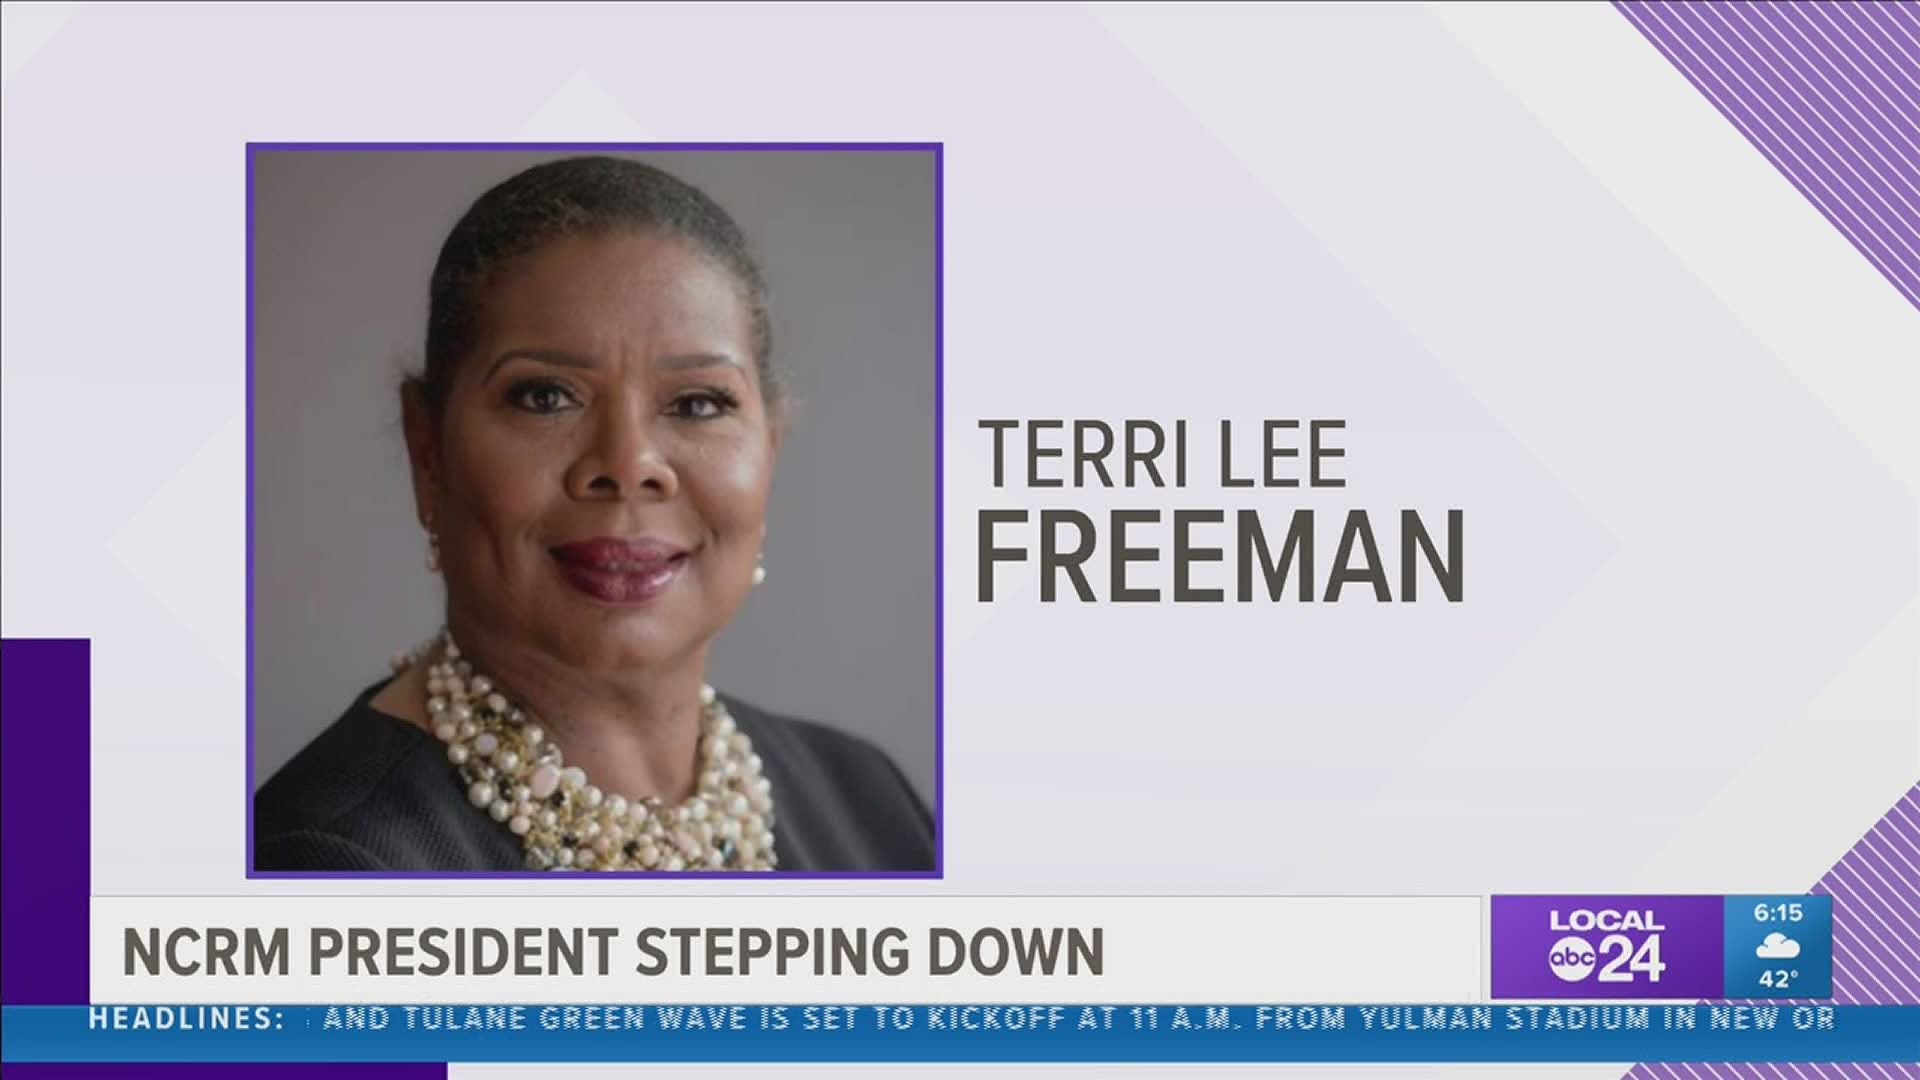 Terri Lee Freeman was appointed president of the National Civil Rights Museum in November 2014.